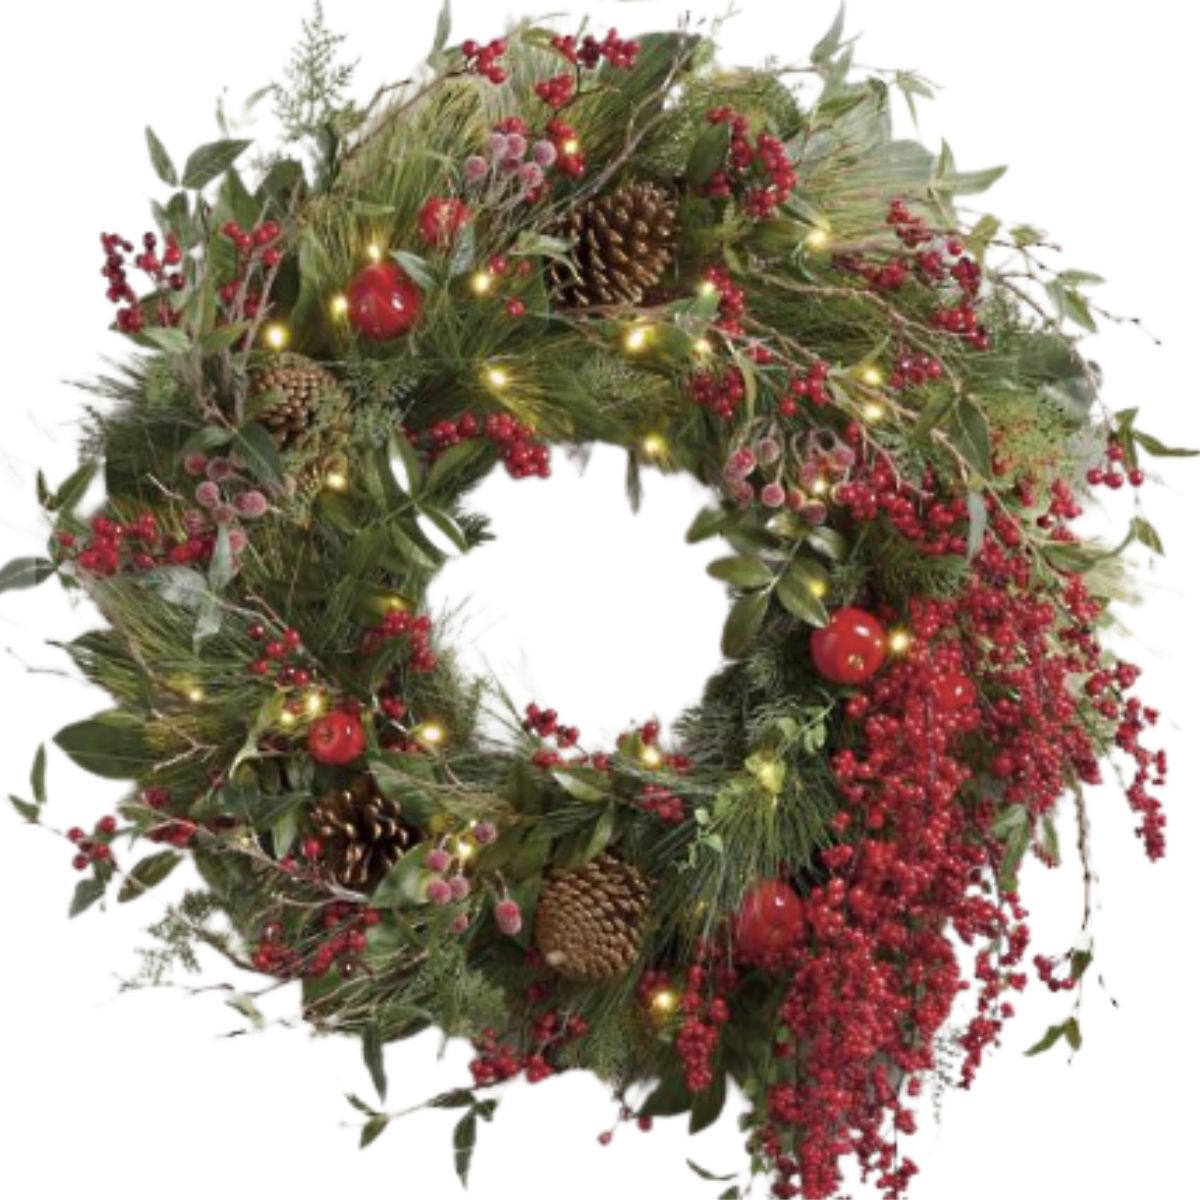 winter berry wreath with light up lights from grandin road